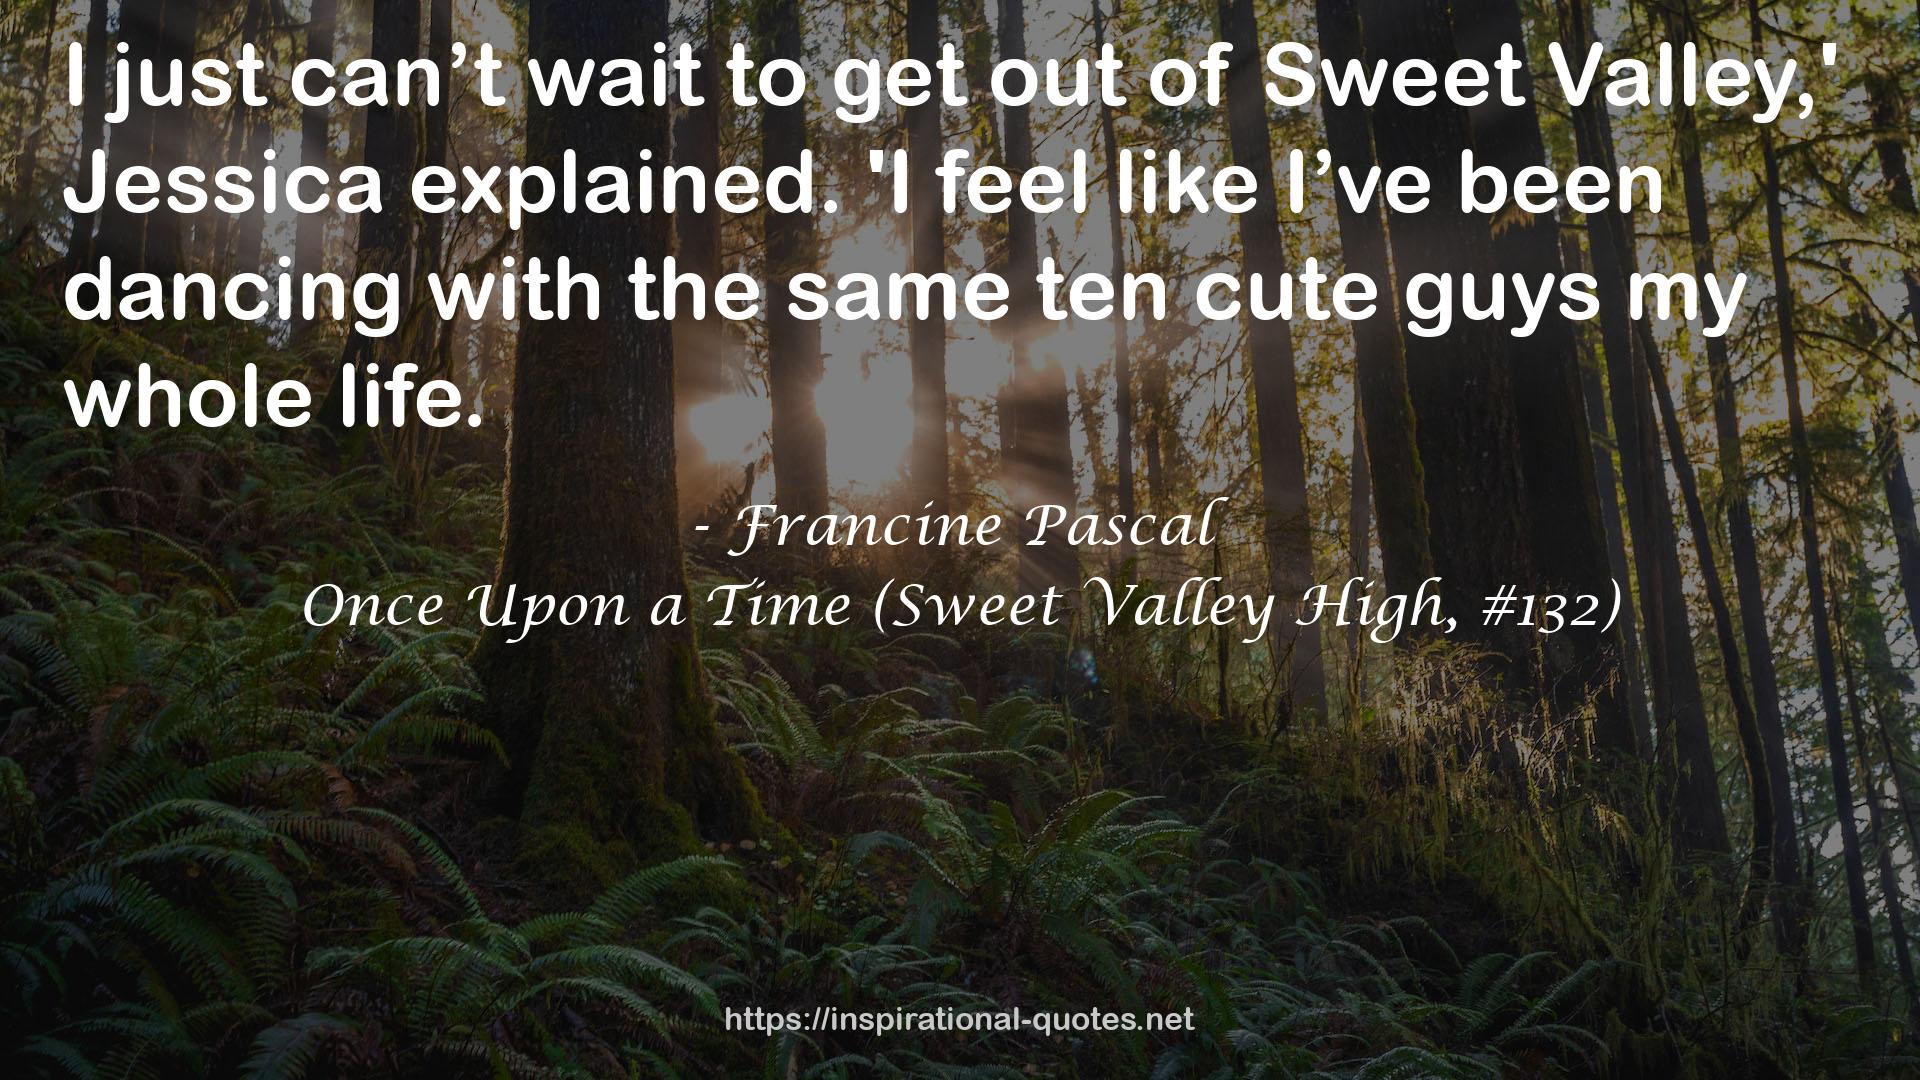 Once Upon a Time (Sweet Valley High, #132) QUOTES